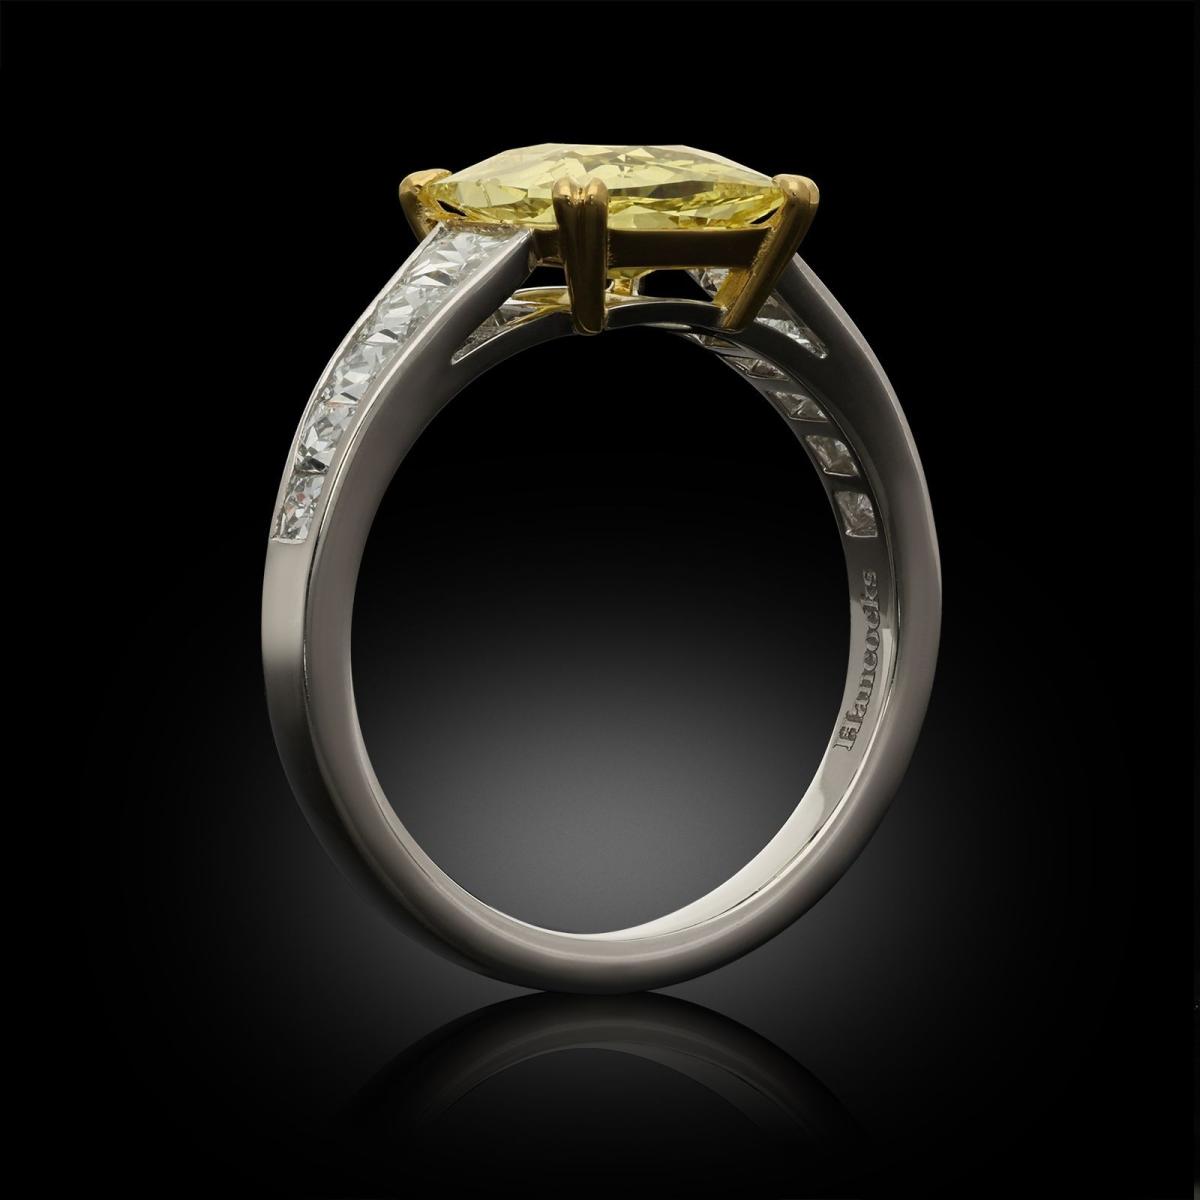 Hancocks 2.56ct Fancy Intense Yellow Old Cushion Cut Diamond Ring With French Cut Shoulders